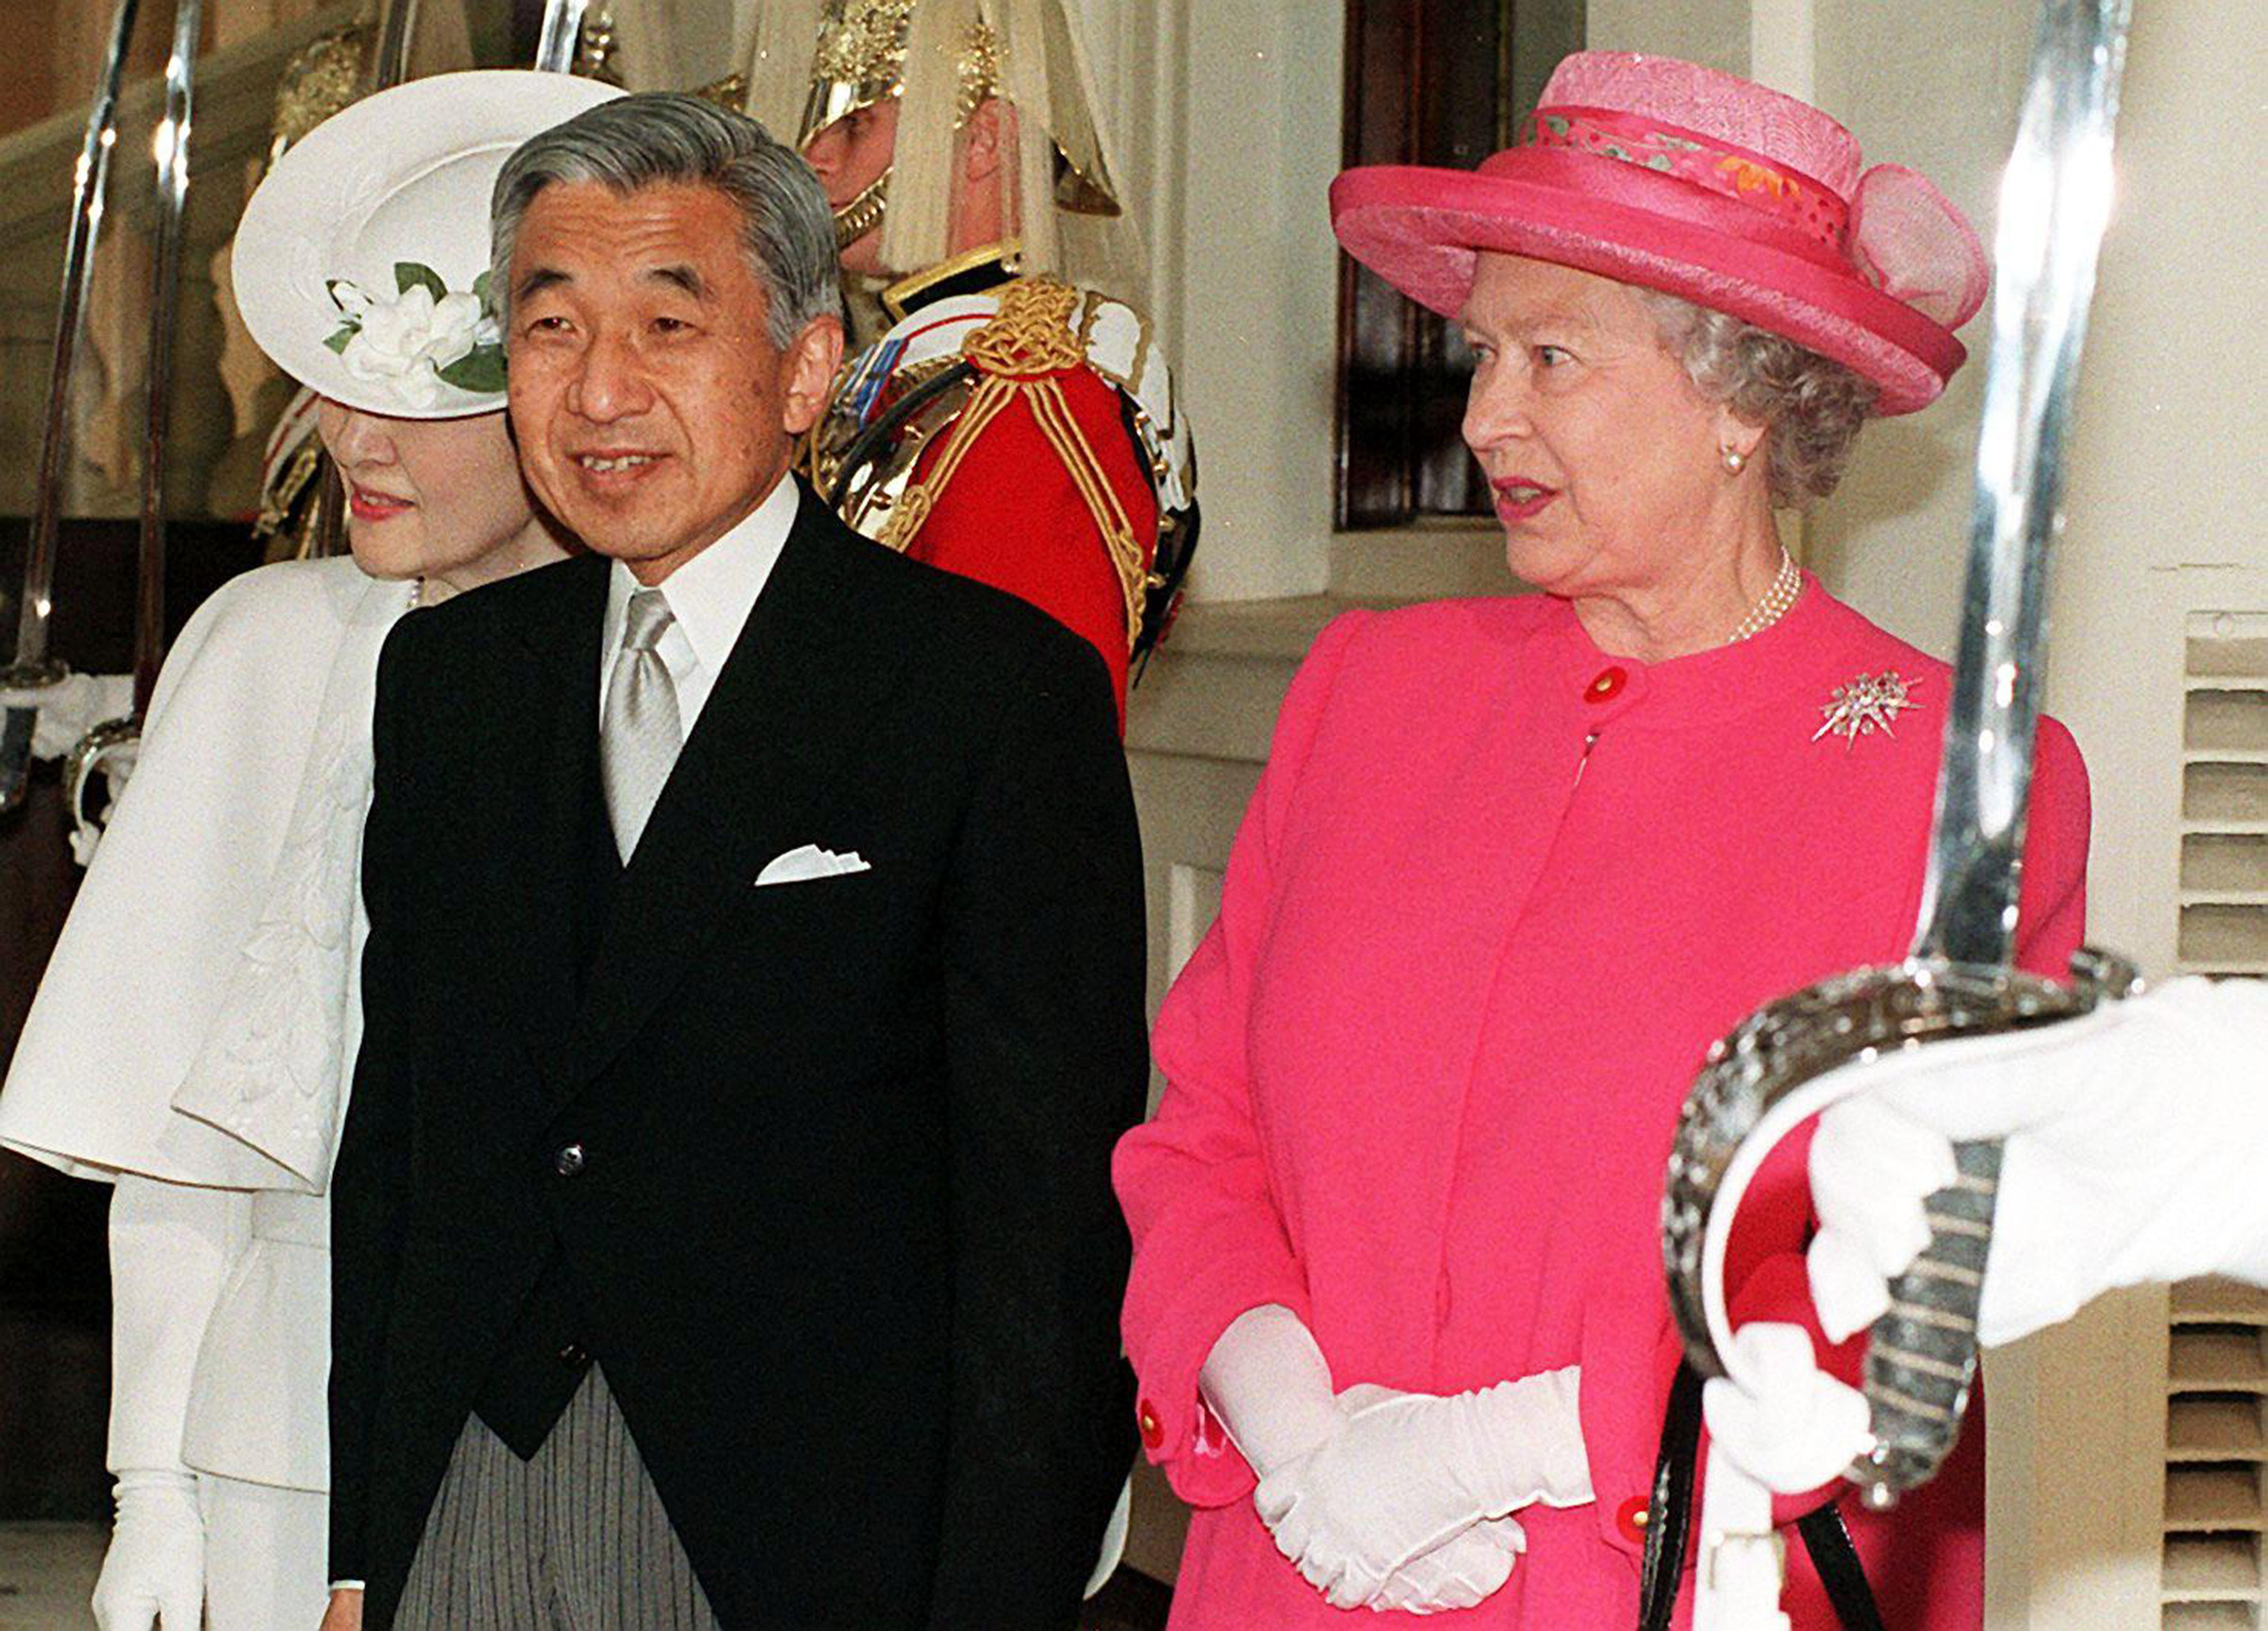 Queen Elizabeth II welcomes the Japanese Emperor Akihito and Empress Michiko to Buckingham Palace on May 26, 1998. (Martyn Hayhow/AFP—Getty Images)